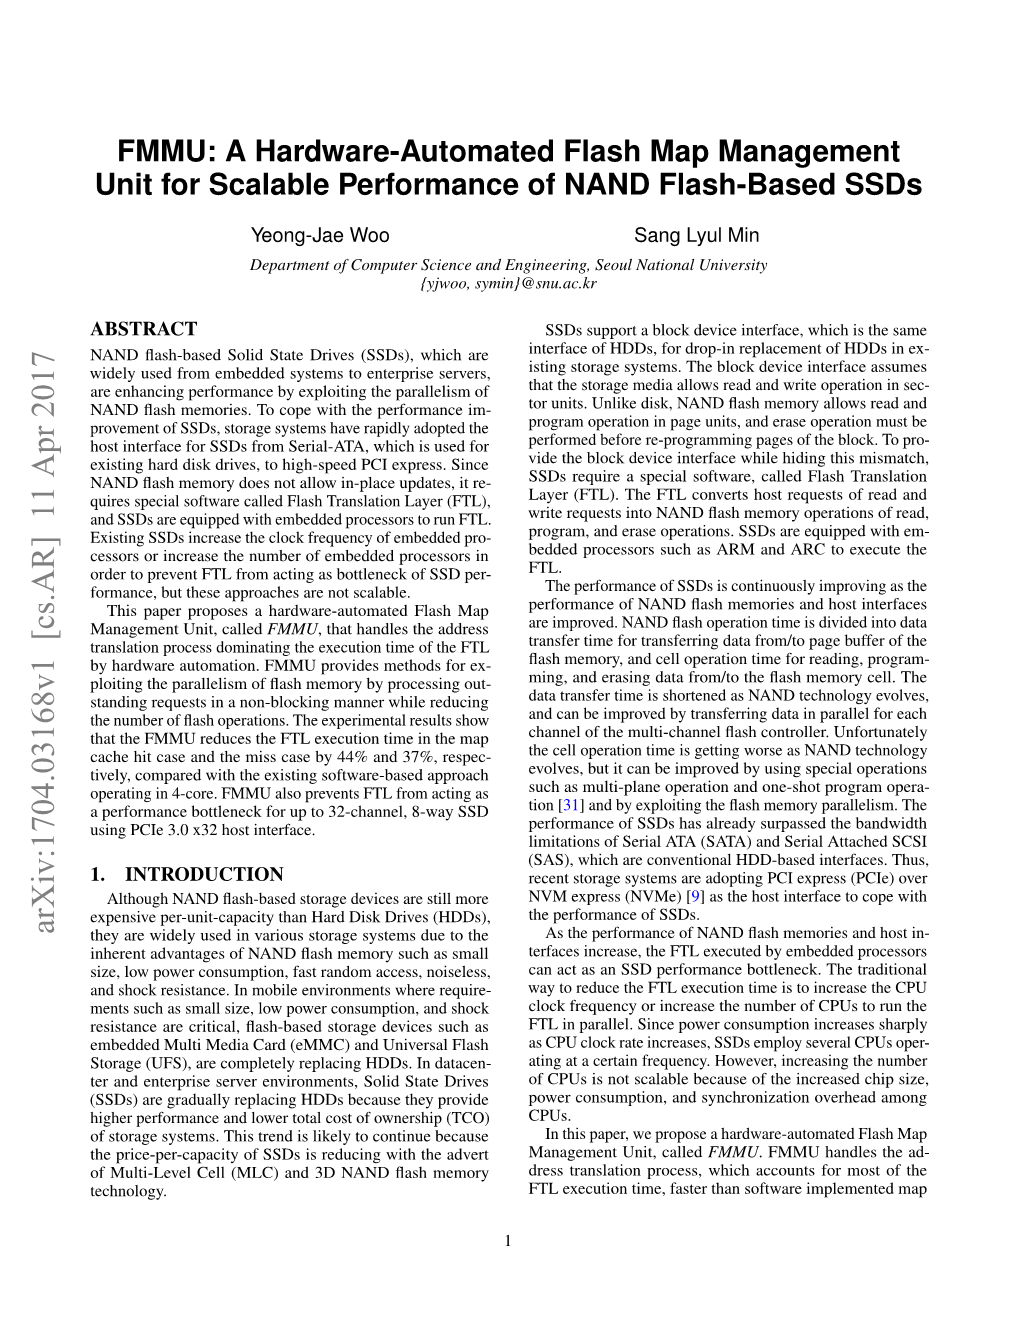 FMMU: a Hardware-Automated Flash Map Management Unit for Scalable Performance of NAND Flash-Based Ssds